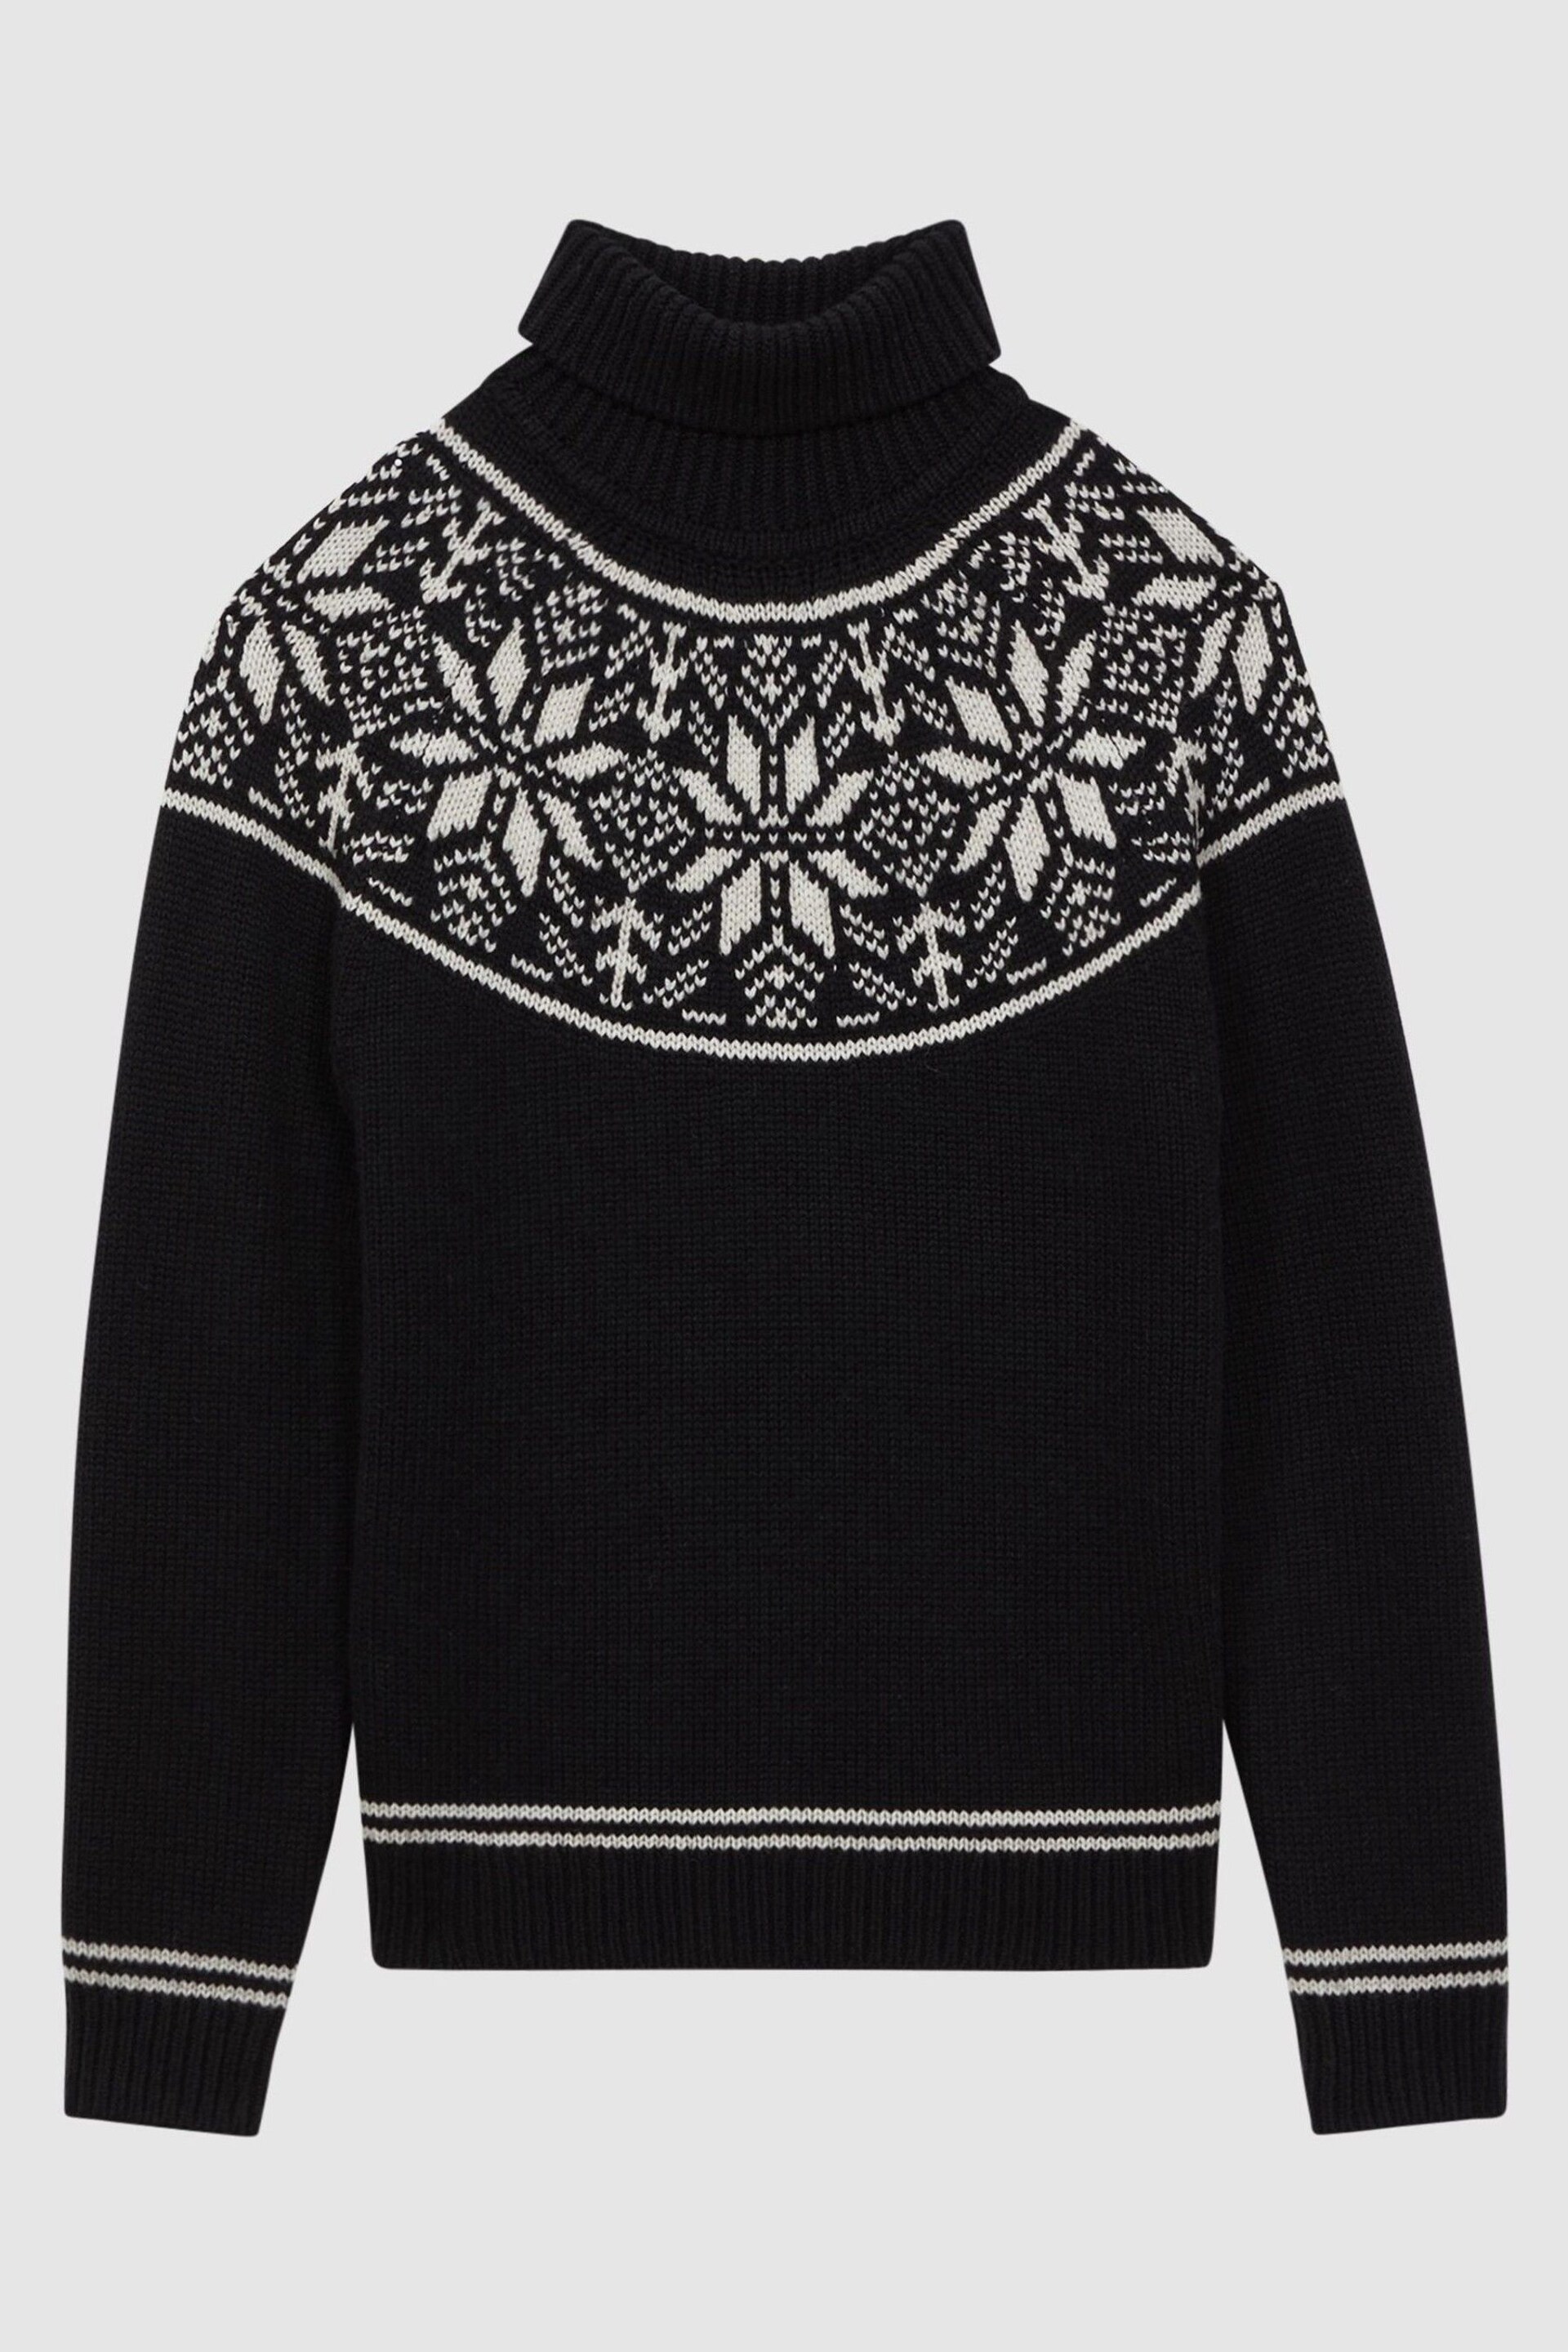 Reiss Black Abbotsford Knitted Fair Isle Roll Neck Jumper - Image 2 of 4